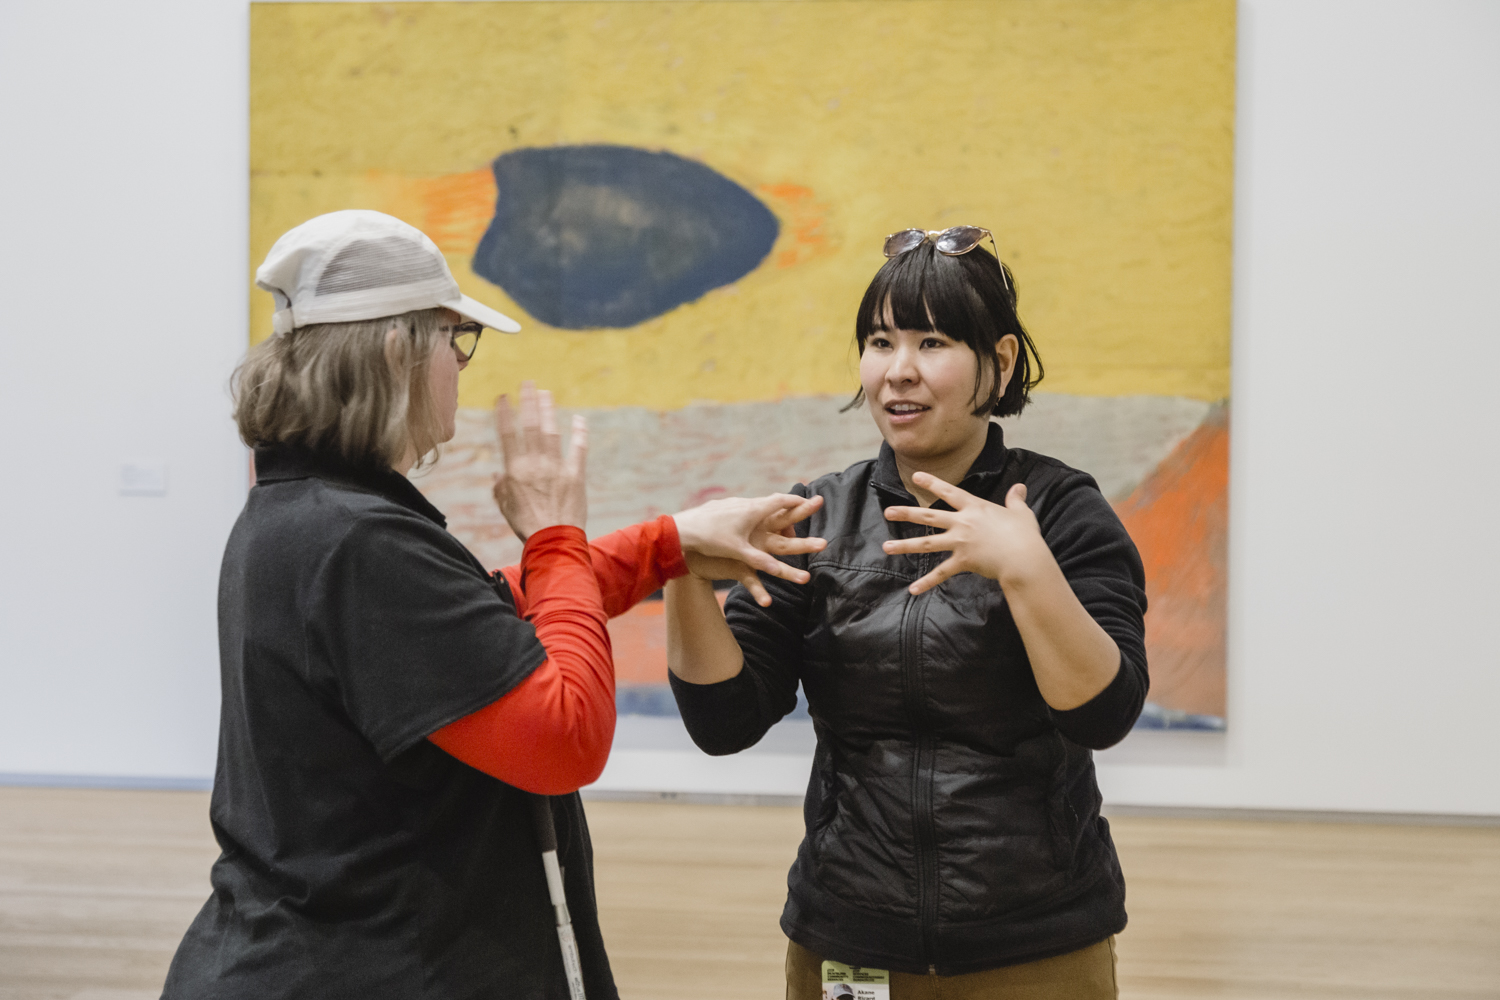 An intervenor uses tactile sign language to communicate with a Deafblind client at an art gallery